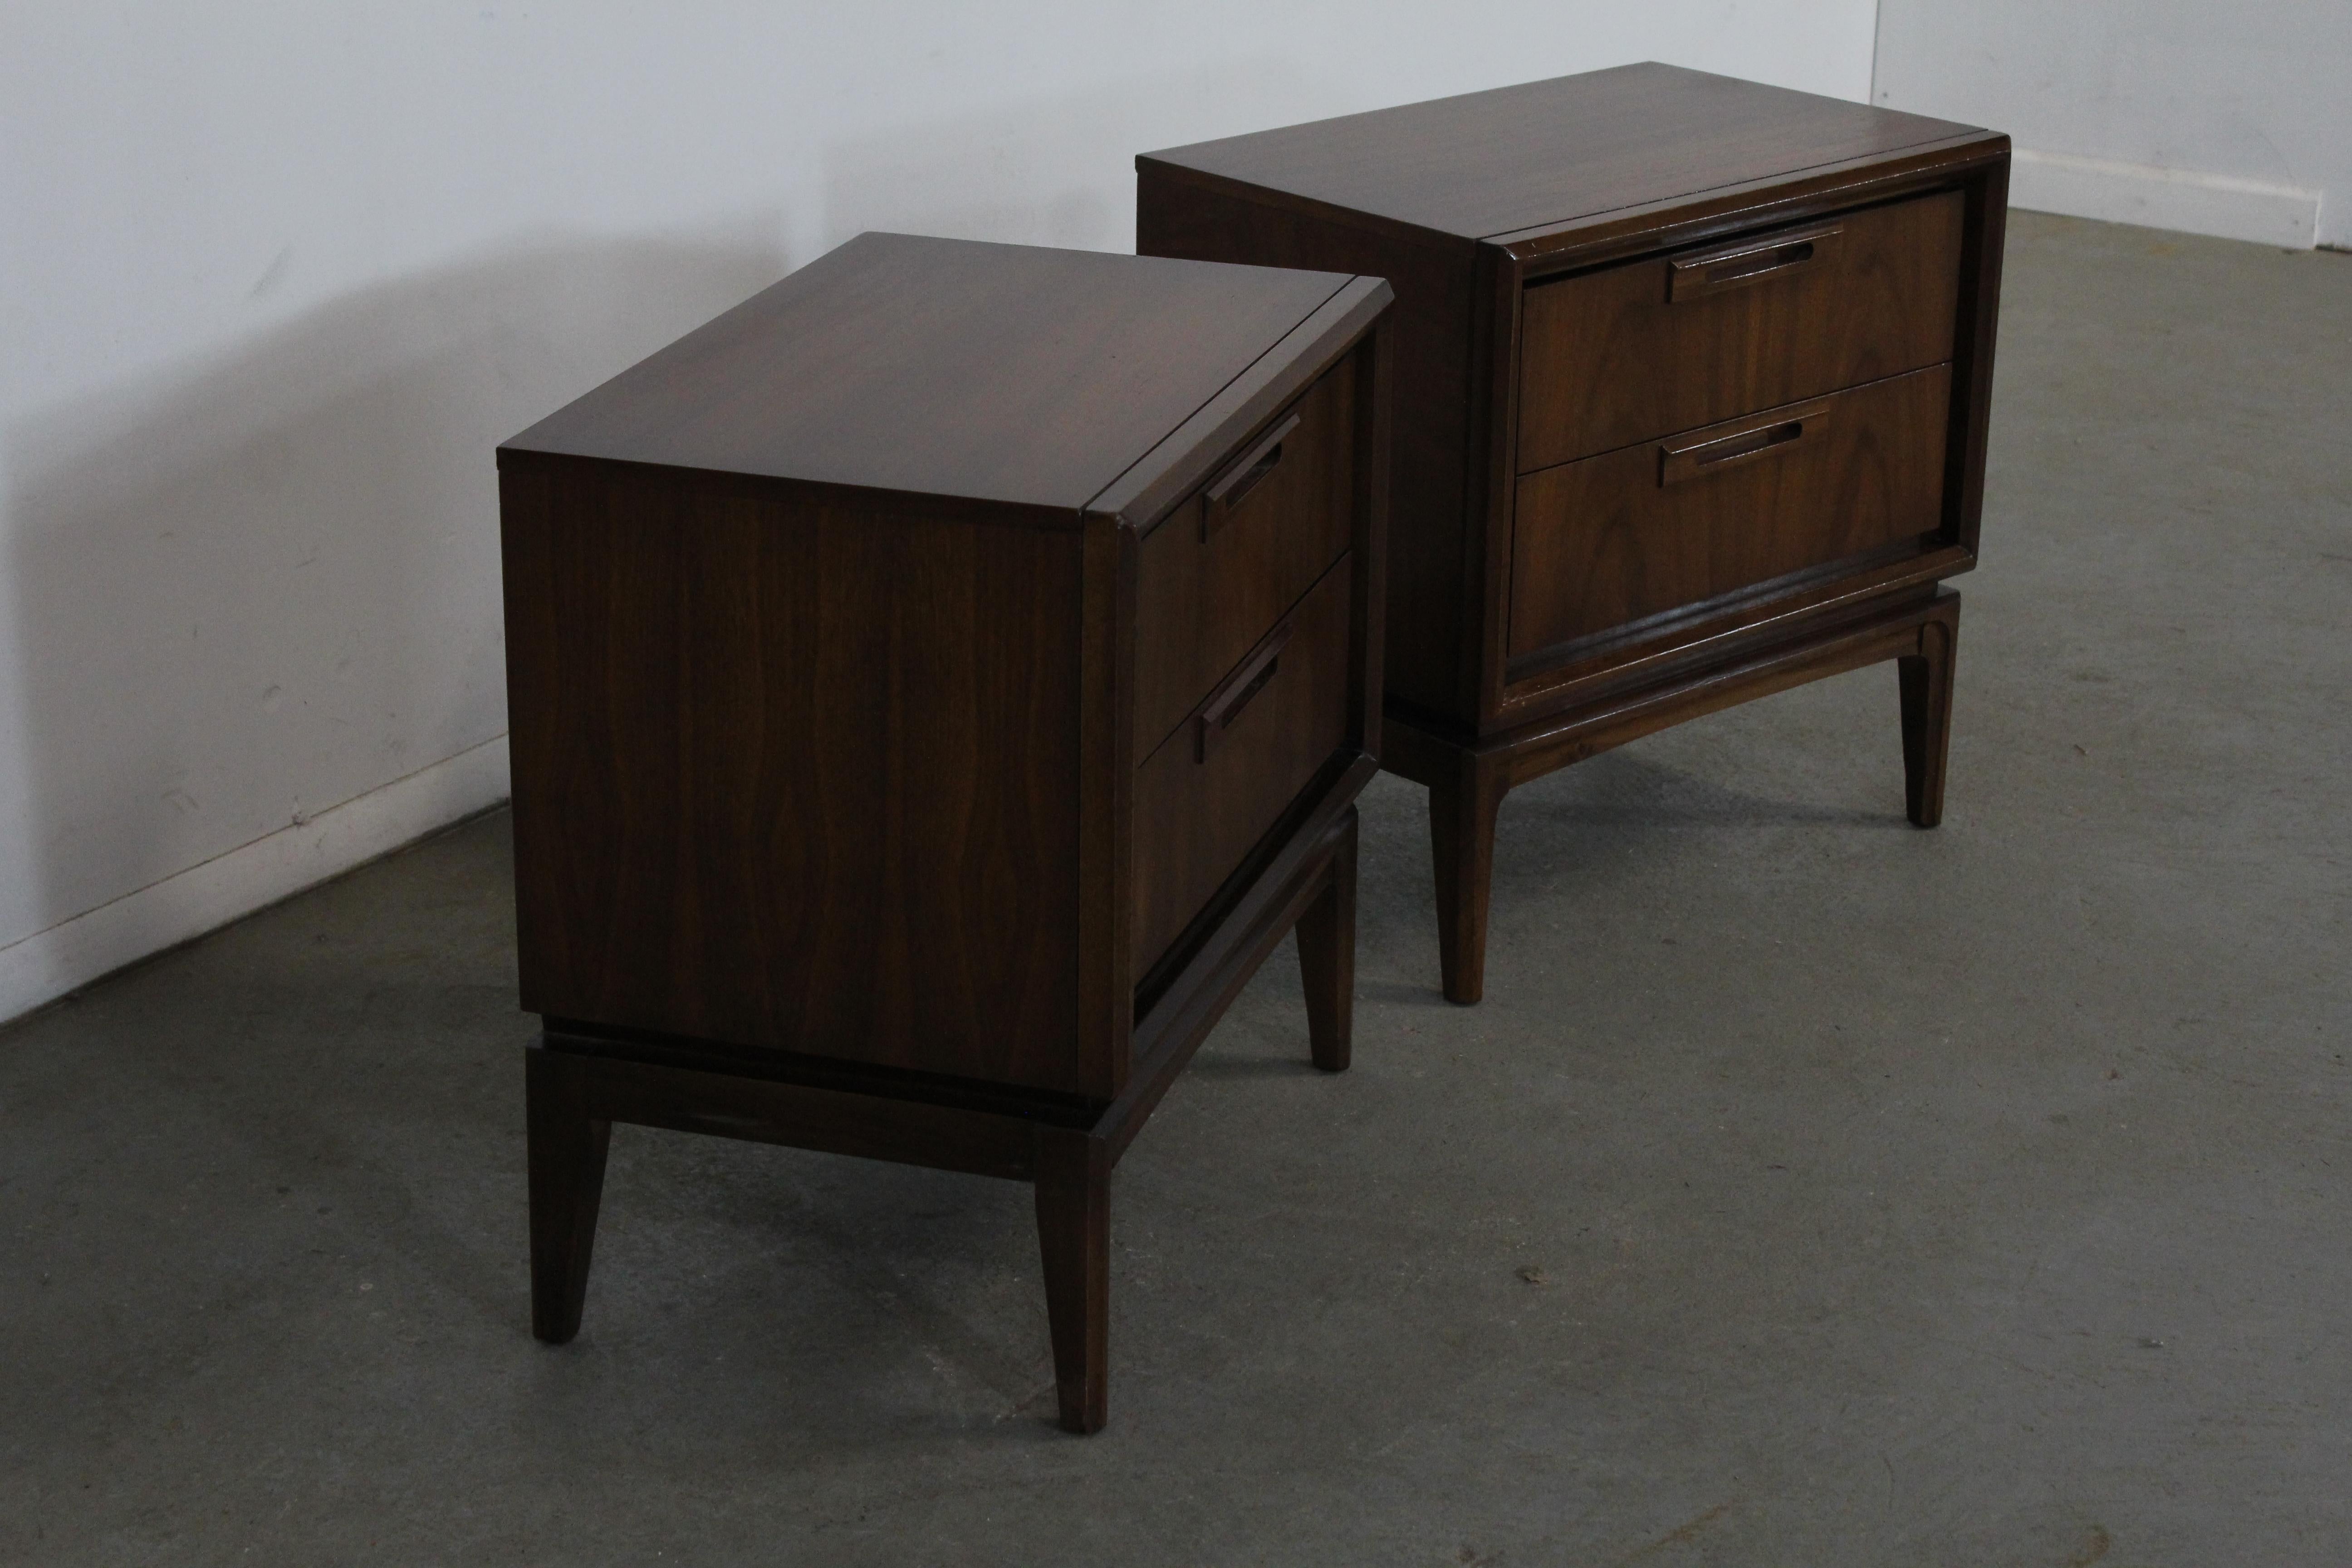 Pair of Vintage mid-century Danish modern walnut nightstands.
Offered is a pair of Mid-Century Modern nightstands. These stands feature a beautiful Walnut face, two drawers each, and on elevated legs. They have been refinished with a walnut stain.